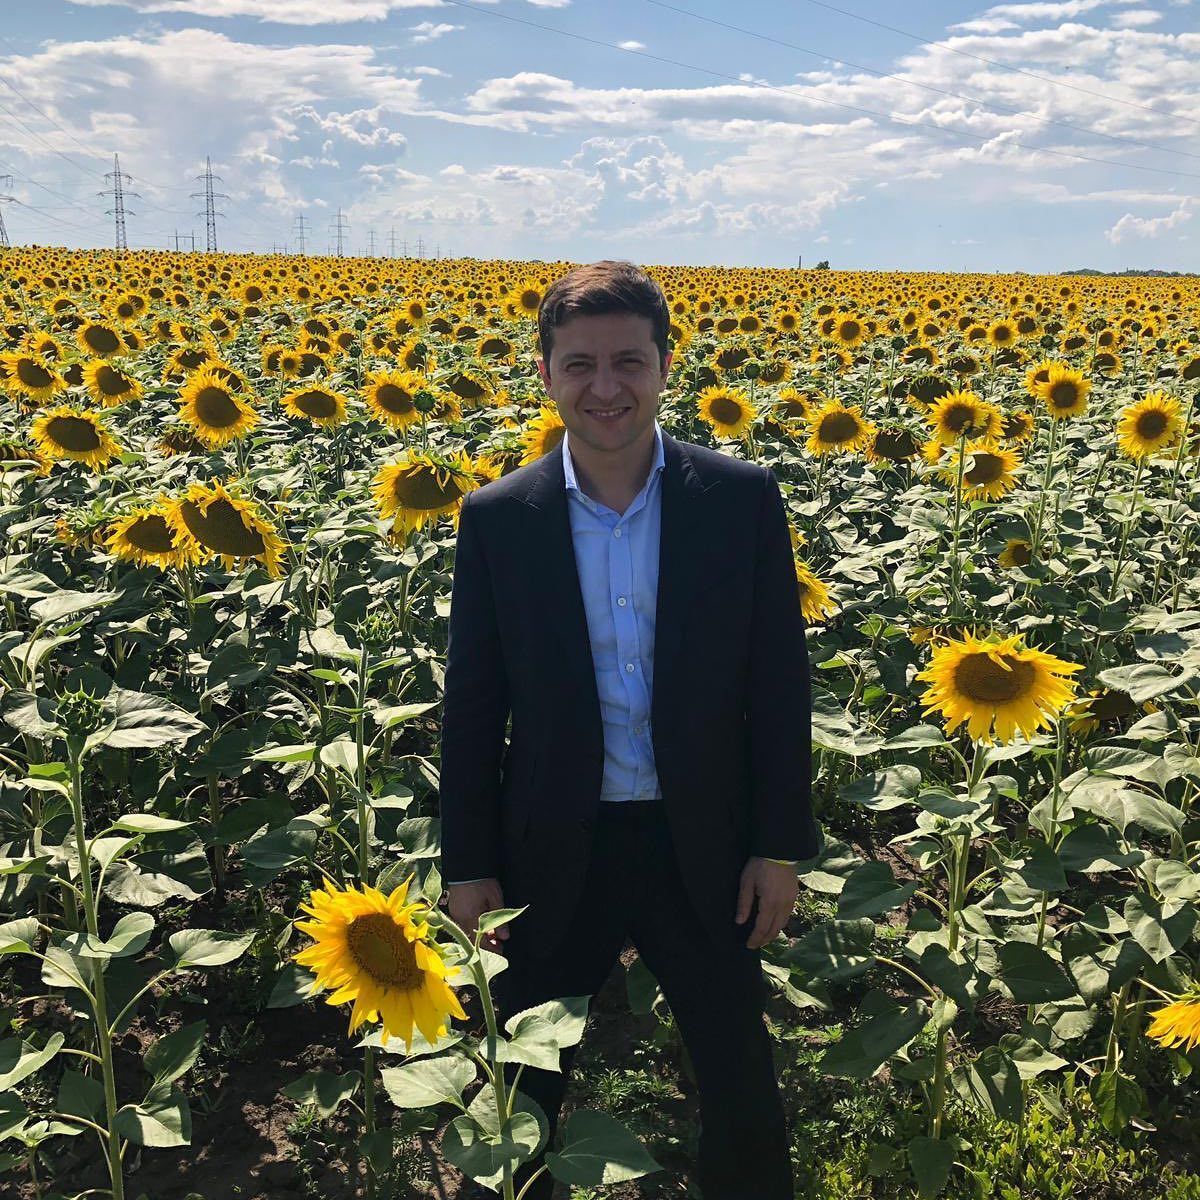 <p>Even before he was put to the ultimate test, Volodymyr Zelensky was a <a href="https://wtmj.com/wisconsins-afternoon-news/2022/03/01/ukraine-president-volodymyr-zelenskyy-stands-above-the-rest/">patriot</a> through and through. Here he stands in a field of Ukraine’s national flower, the <a href="https://www.independent.co.uk/news/world/europe/ukraine-national-flower-sunflower-b2033843.html">sunflower</a>.</p><p><a href="https://www.instagram.com/p/Bz0STrVlNpx/">See photo on Instagram</a></p>